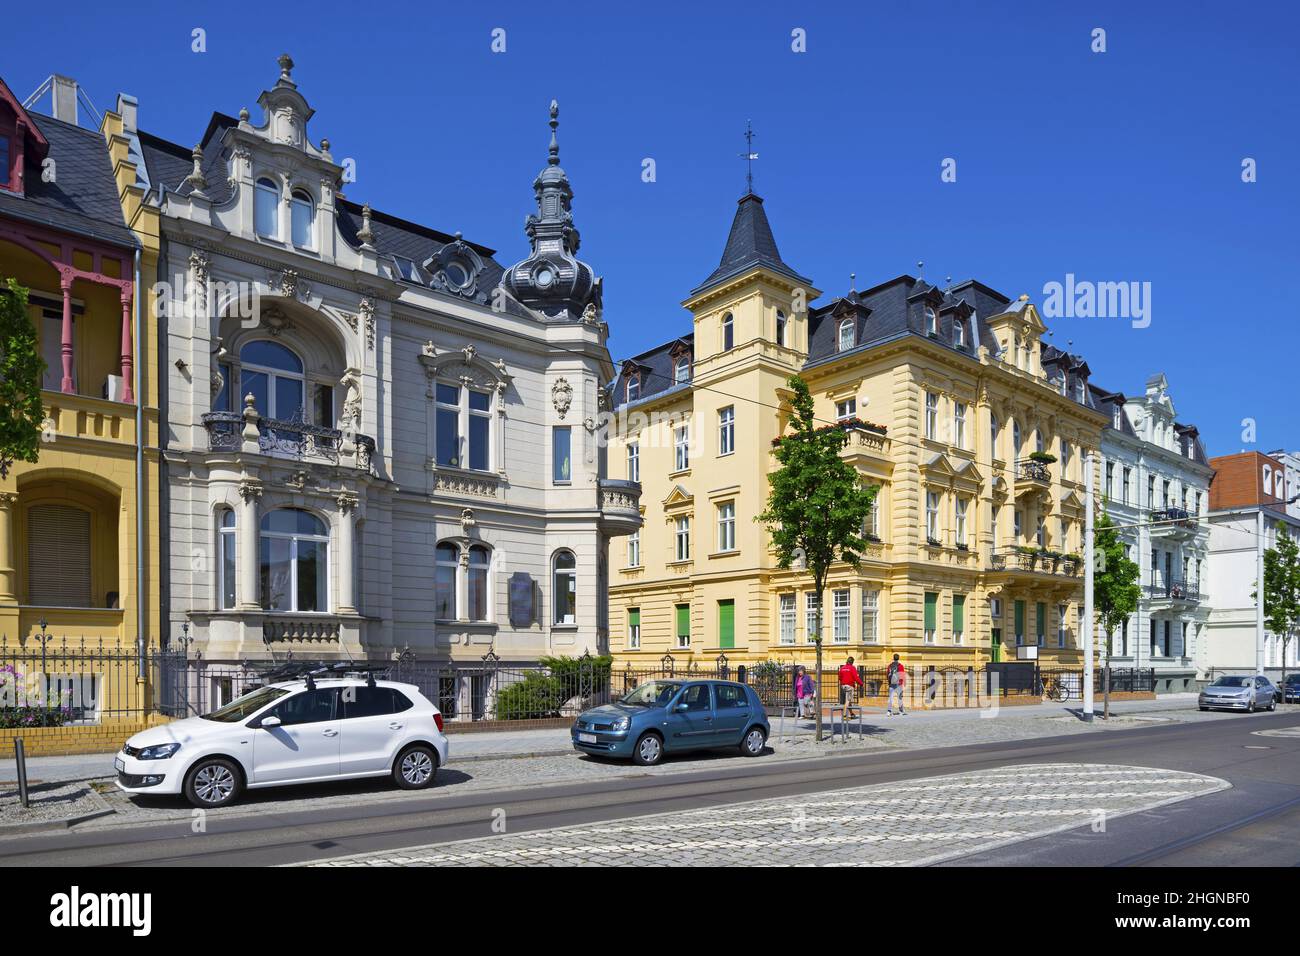 Colourful facades of old historical tenement houses on the Bahnhofstraße street in Cottbus, Brandenburg, Germany Stock Photo